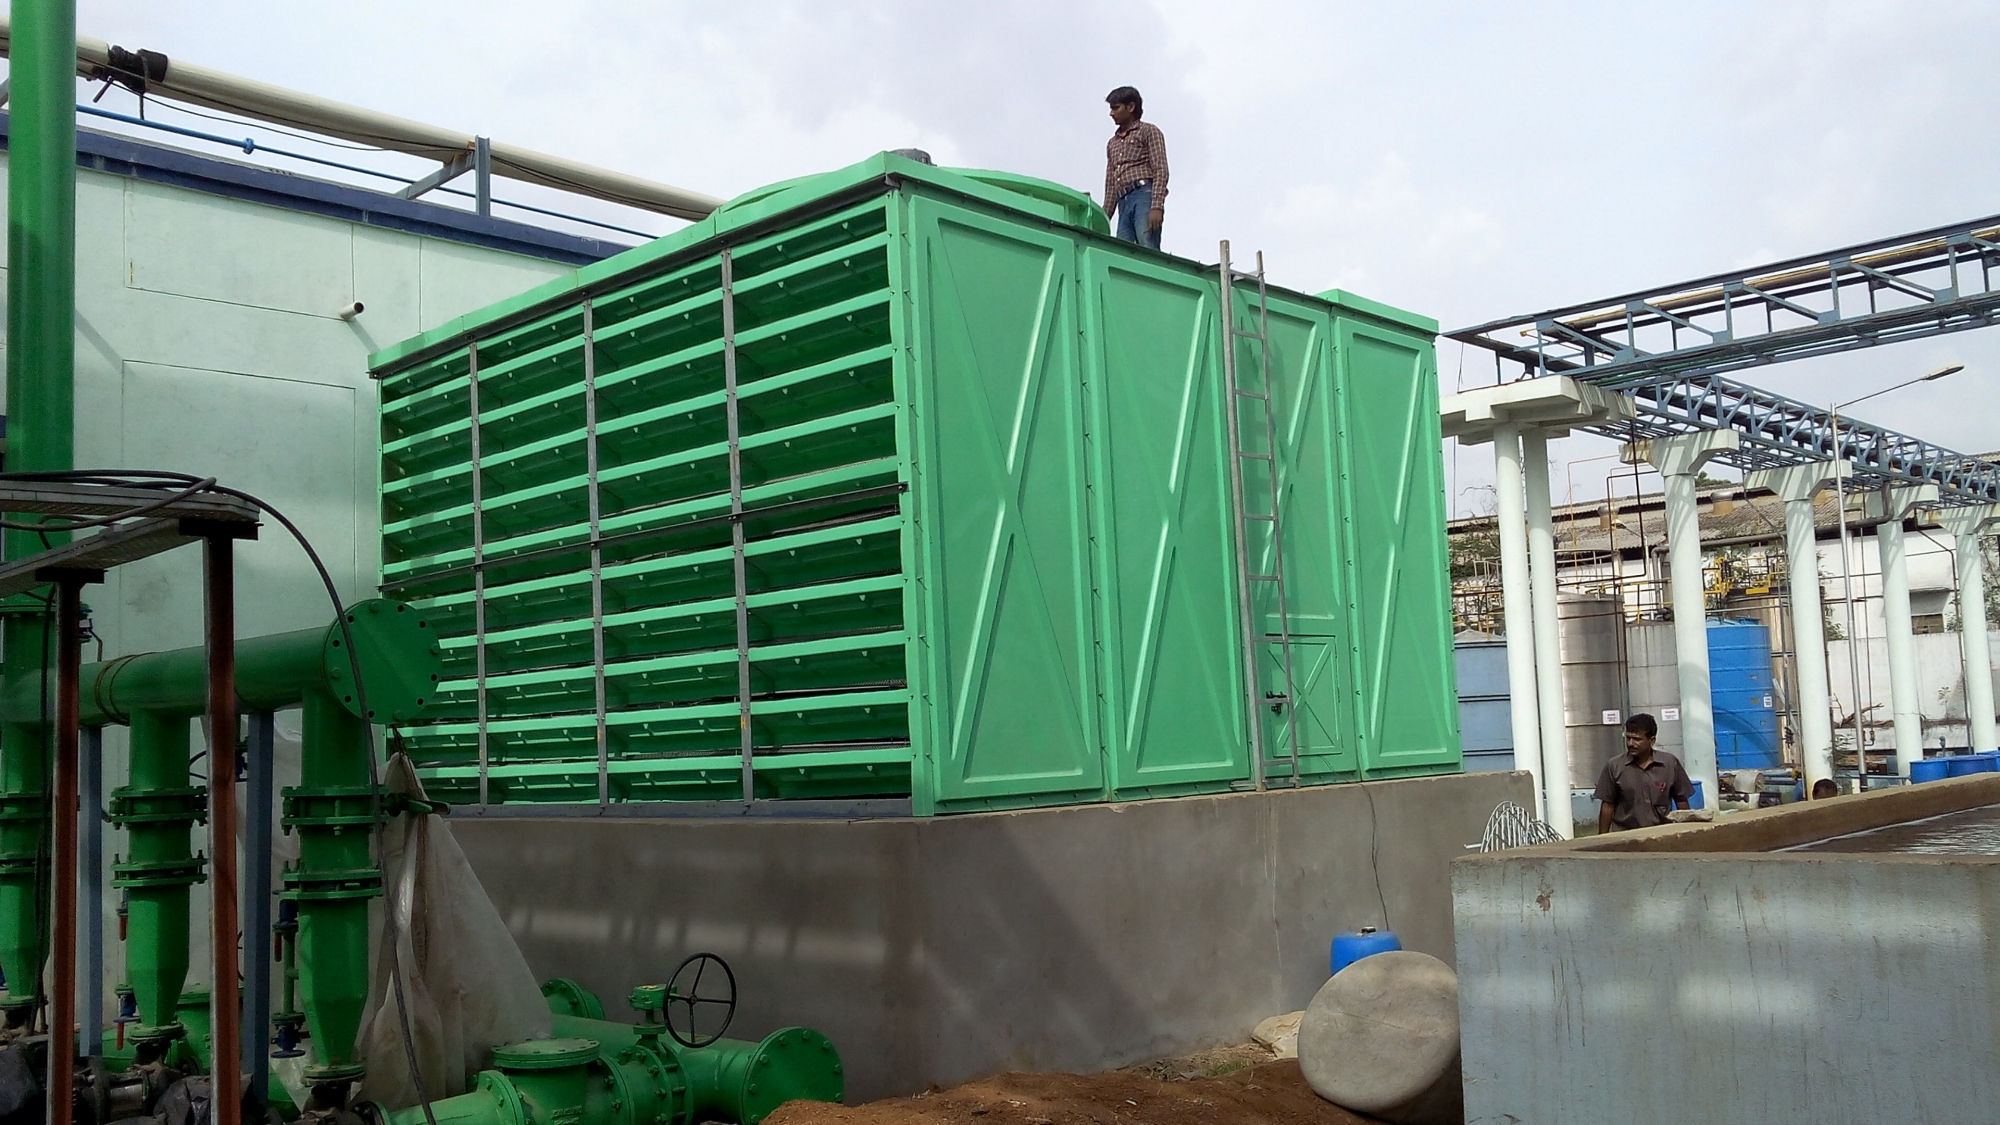 Timber Counter Flow Cooling Tower | AVANI ARTECH COOLING TOWERS PVT. LTD. | Timber Counter Flow Cooling Tower manufacturer in Hyderabad,Timber Counter Flow Cooling Tower in Visakhapatnam,Timber Counter Flow Cooling Tower in Vijaywada,Timber Counter Flow Cooling Tower in AP - GL18946